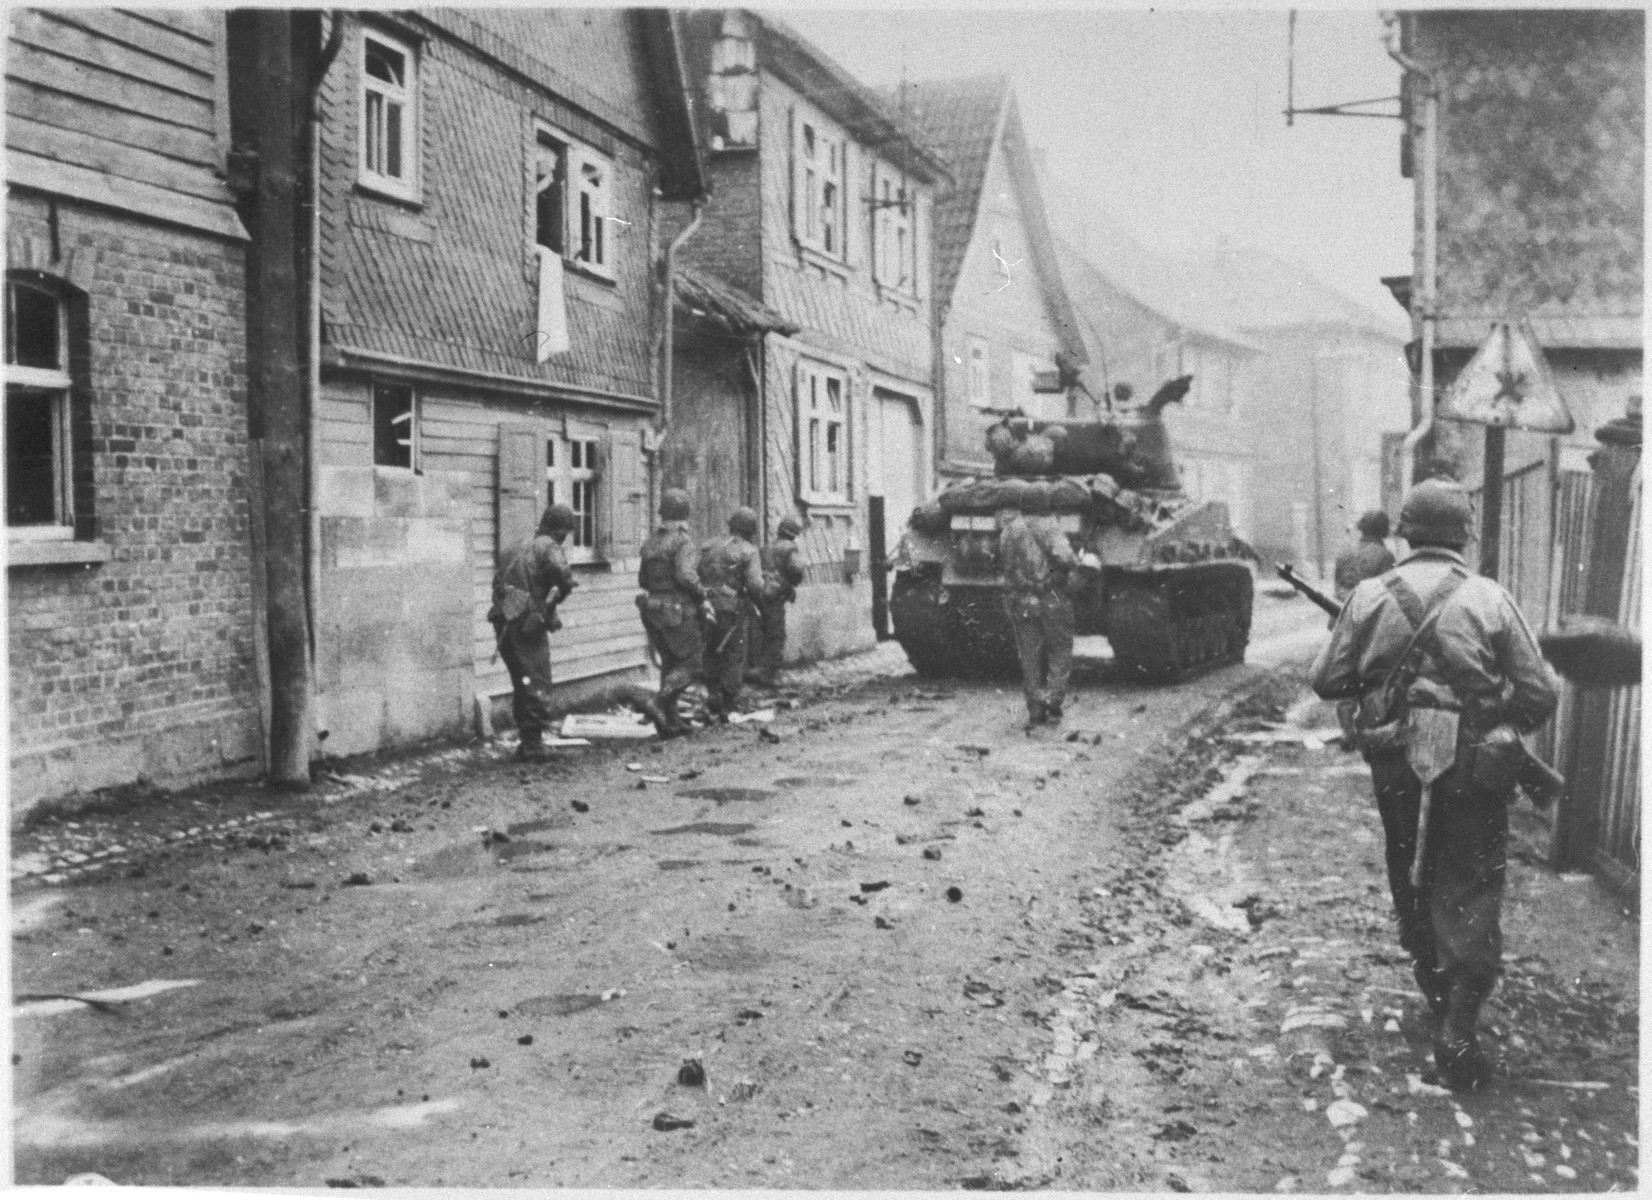 American troops advance through the streets of Aachen during the liberation of Germany.